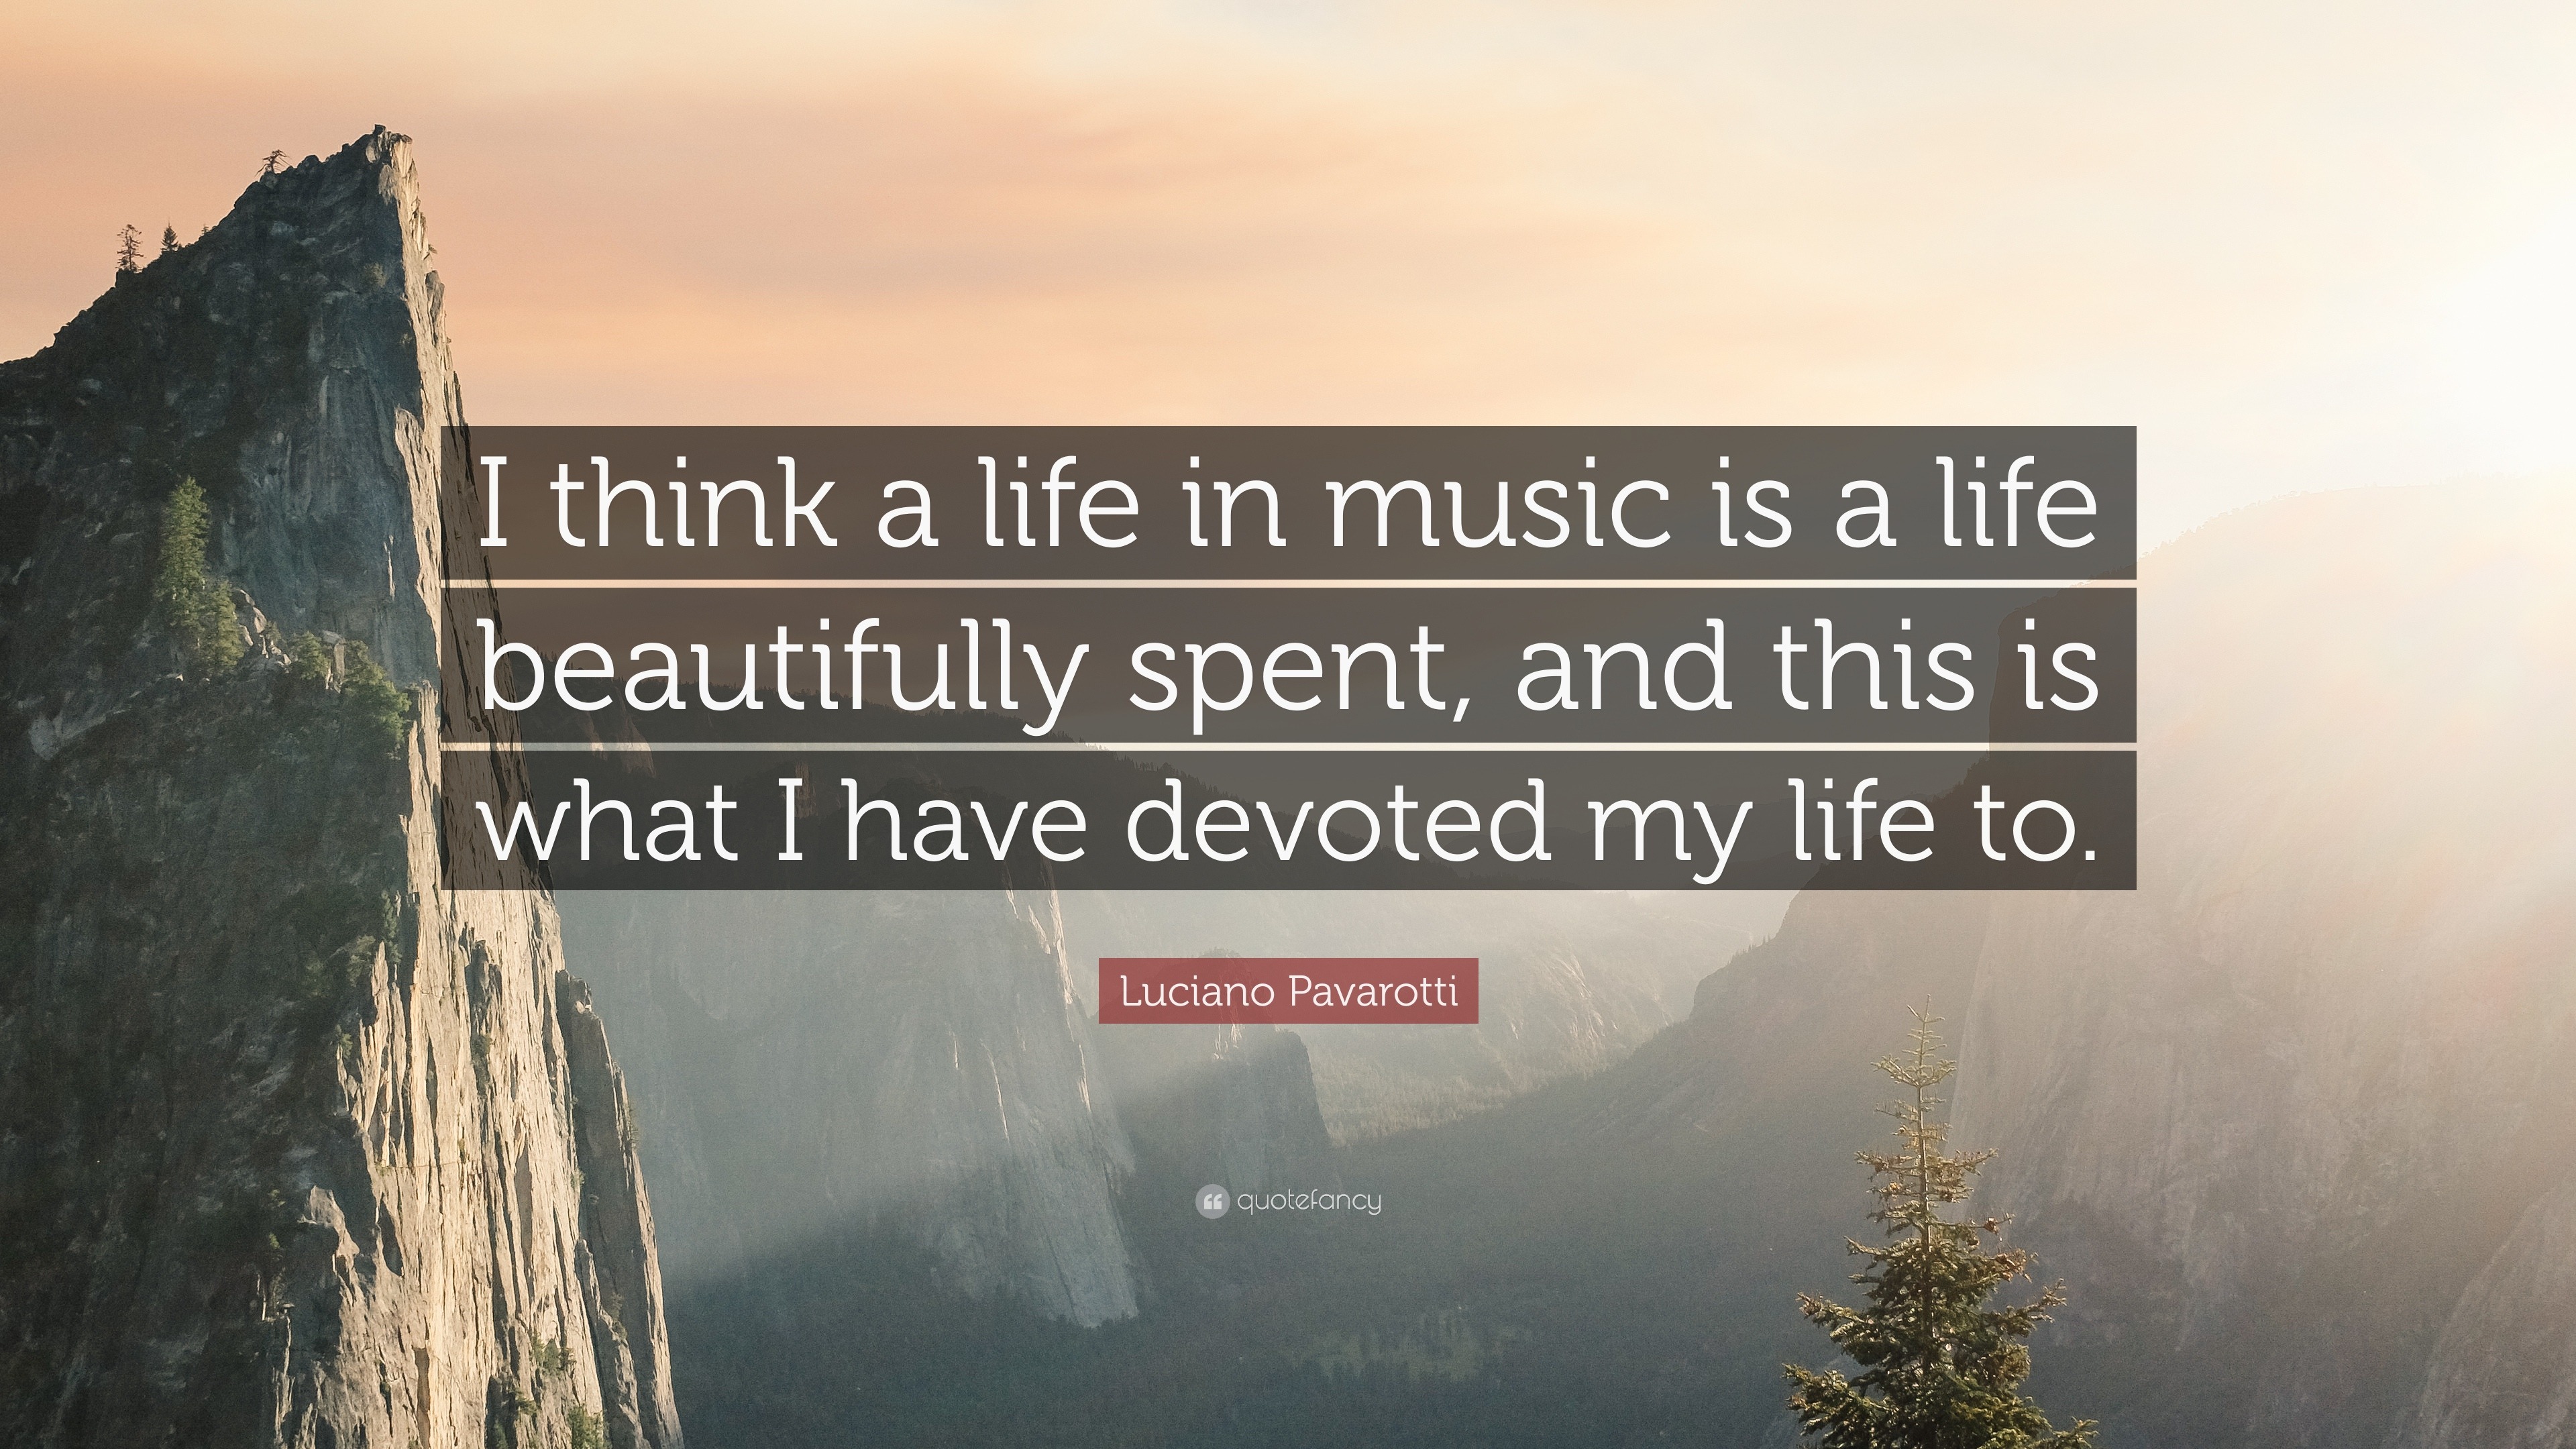 Luciano Pavarotti Quote “I think a life in music is a life beautifully spent